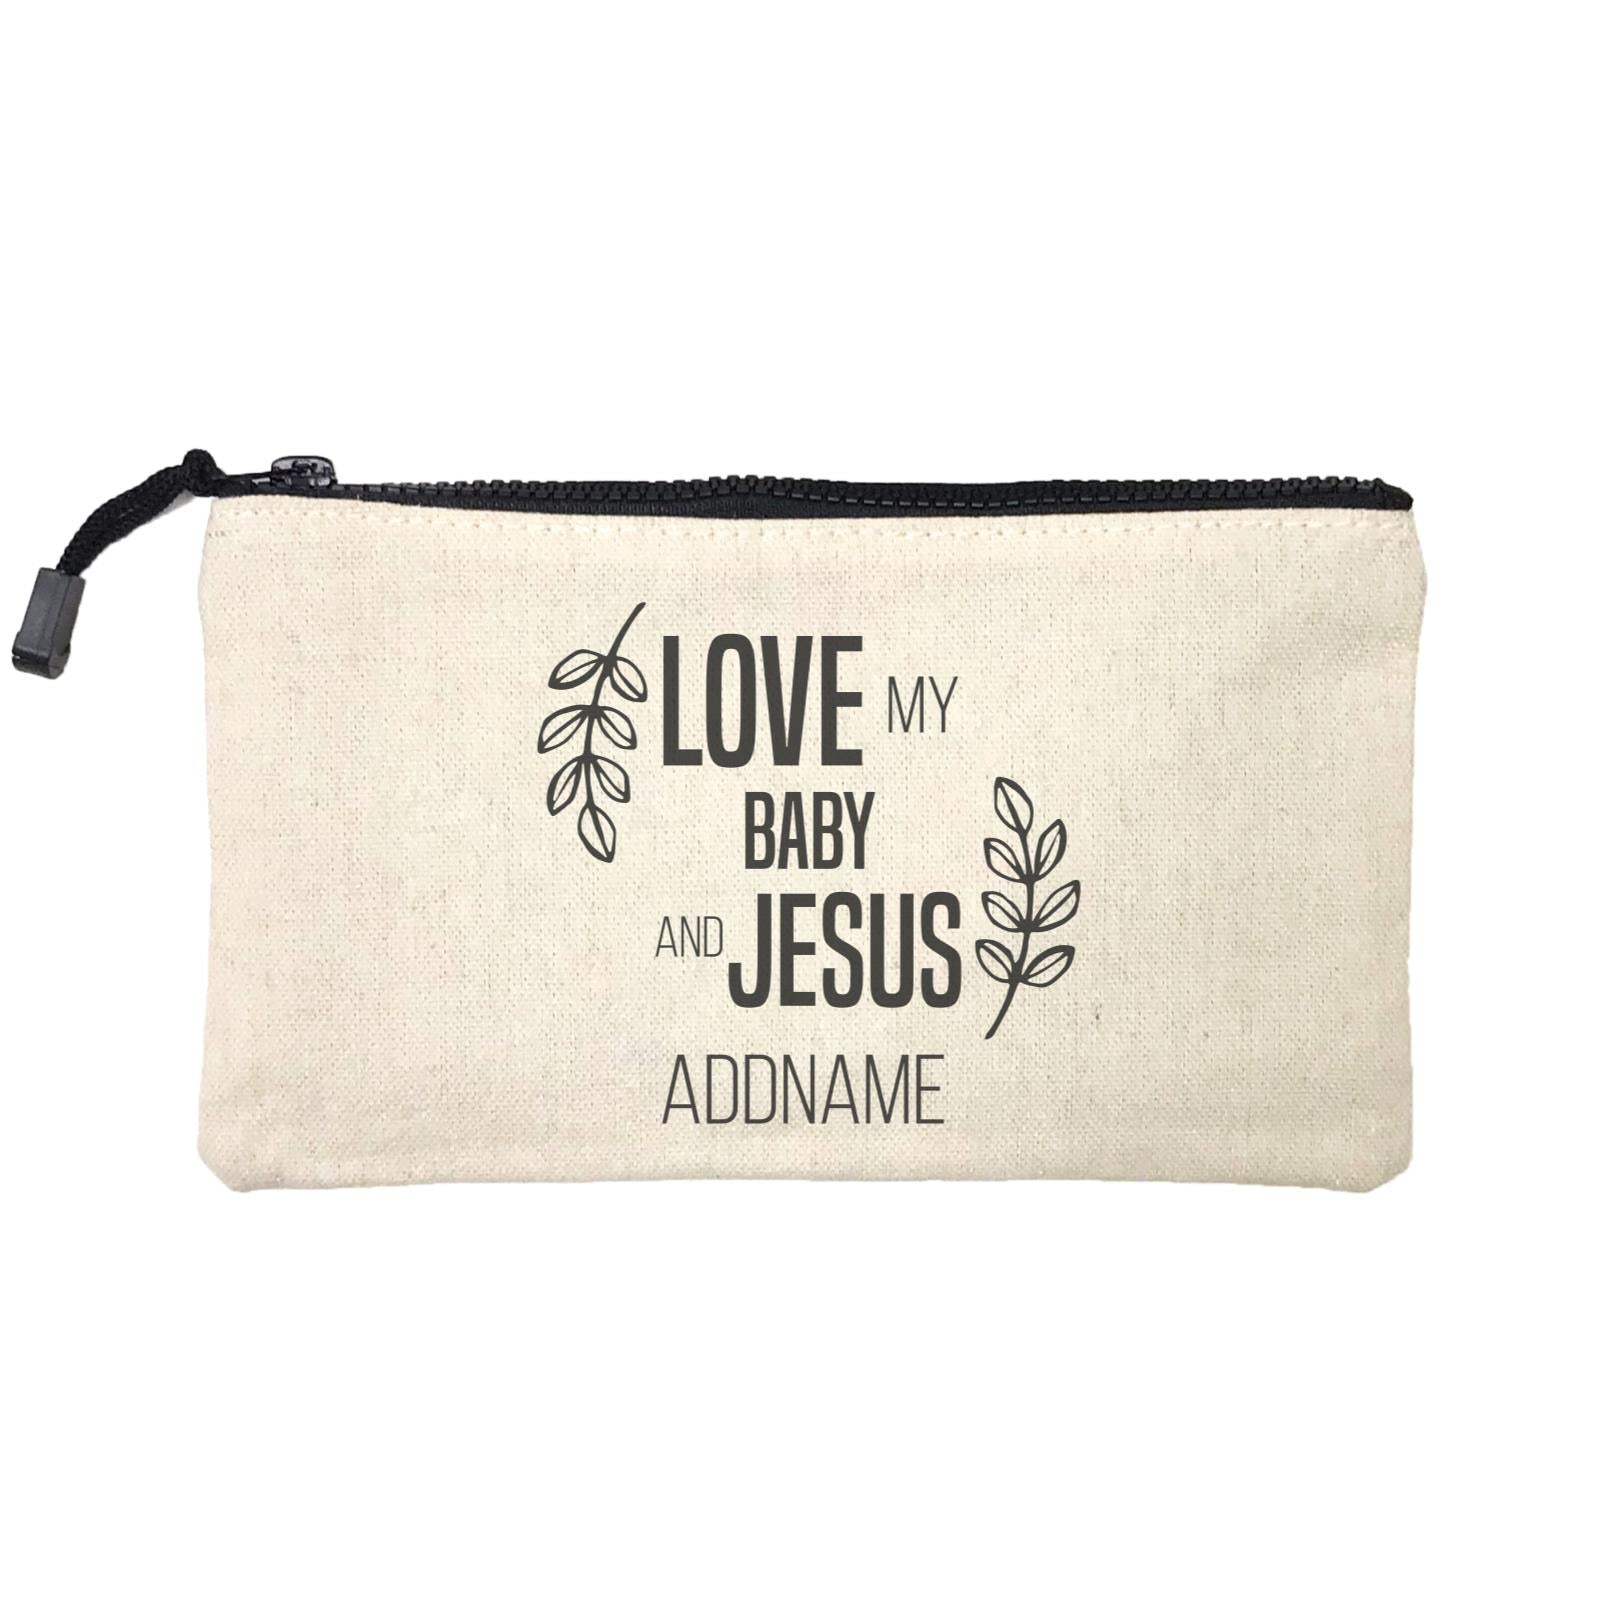 Christian Series Love My Baby And Jesus Addname Mini Accessories Stationery Pouch